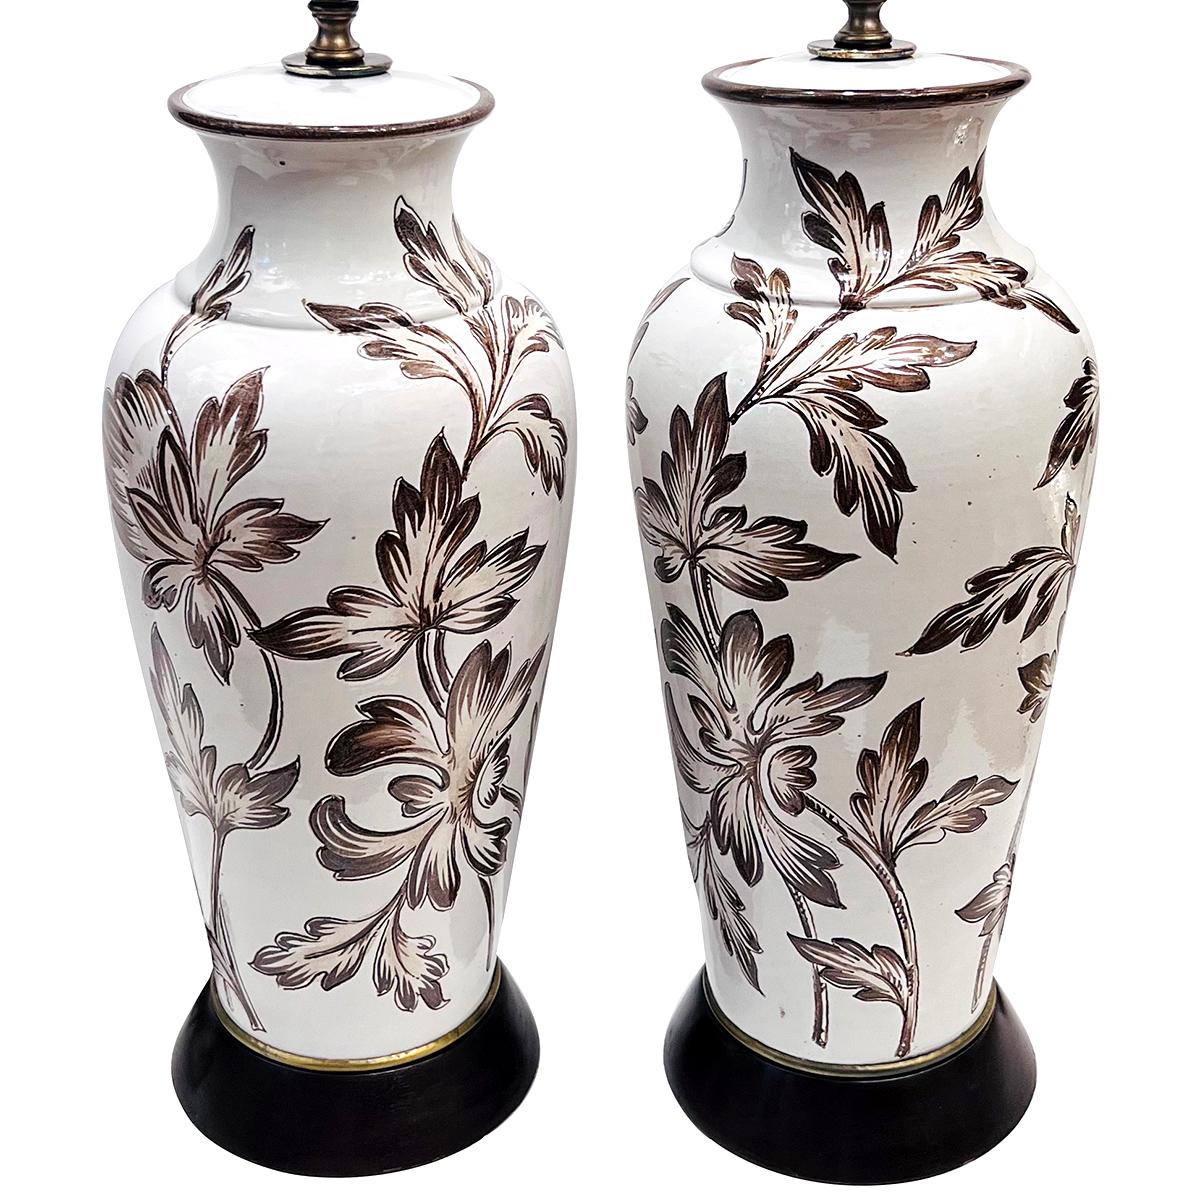 Pair o circa 1950s English porcelain lamps with foliage decoration.

Measurements:
Height of body: 18